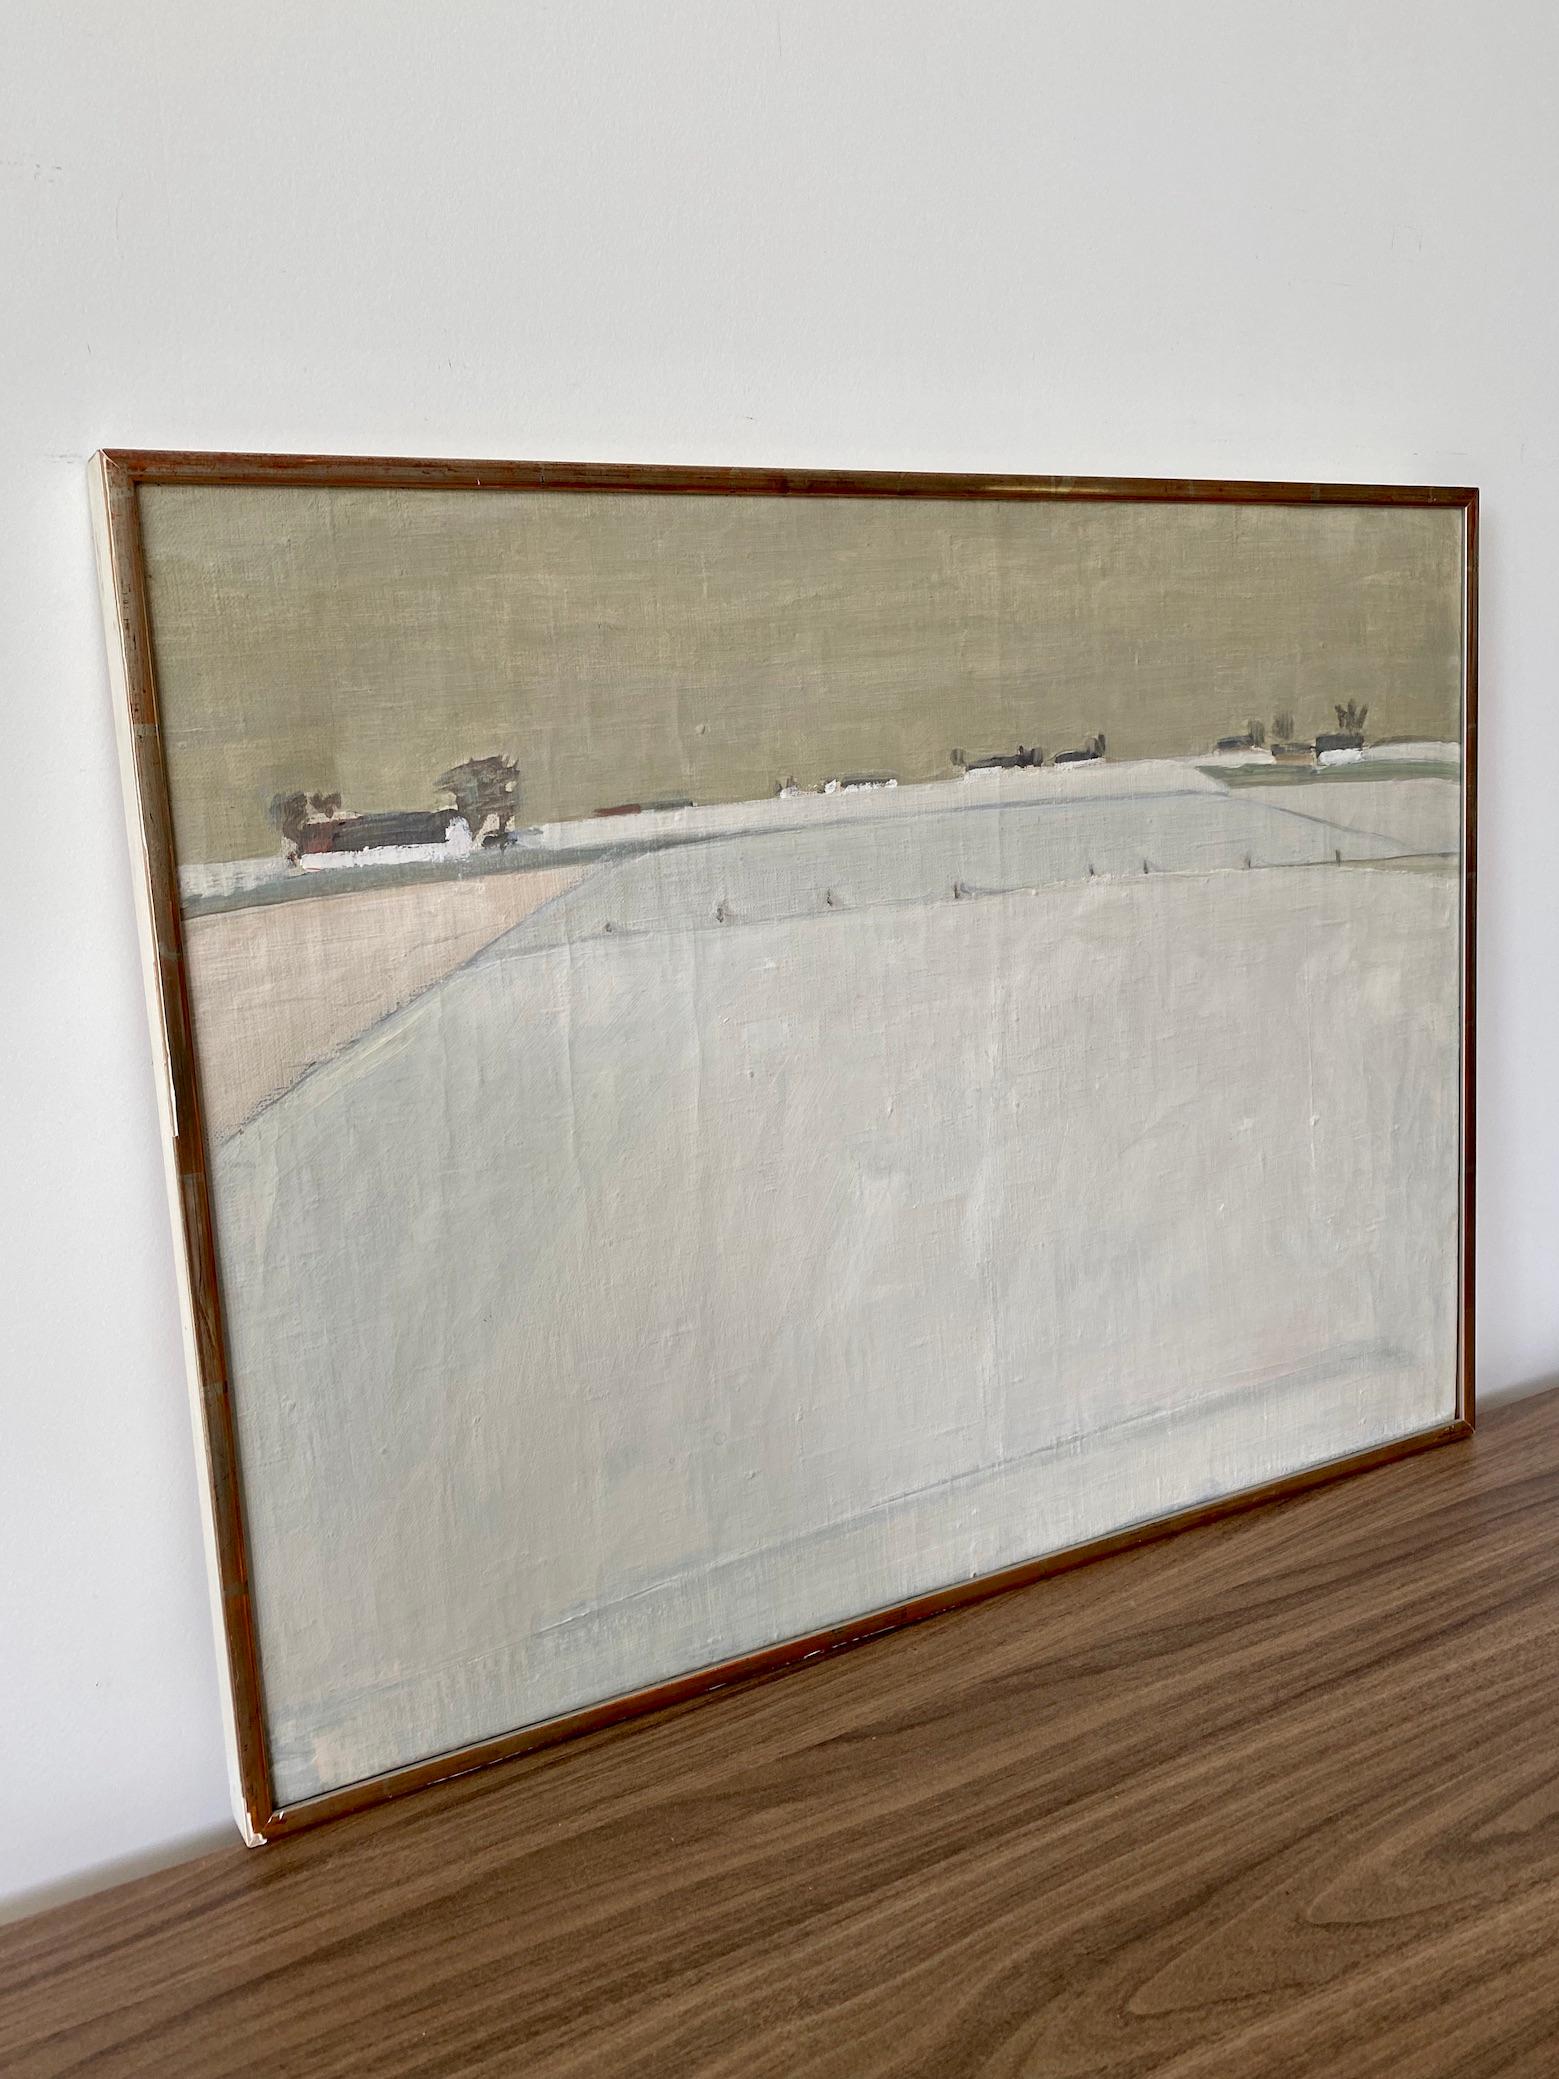 WHITE WINTER
Size: 50.5 x 65.5 cm (including frame)
Oil on Canvas

A semi abstract mid century oil on canvas of a winter landscape, painted in 1957.

In this painting the artist immediately draws our attention to the expansiveness of the snowy